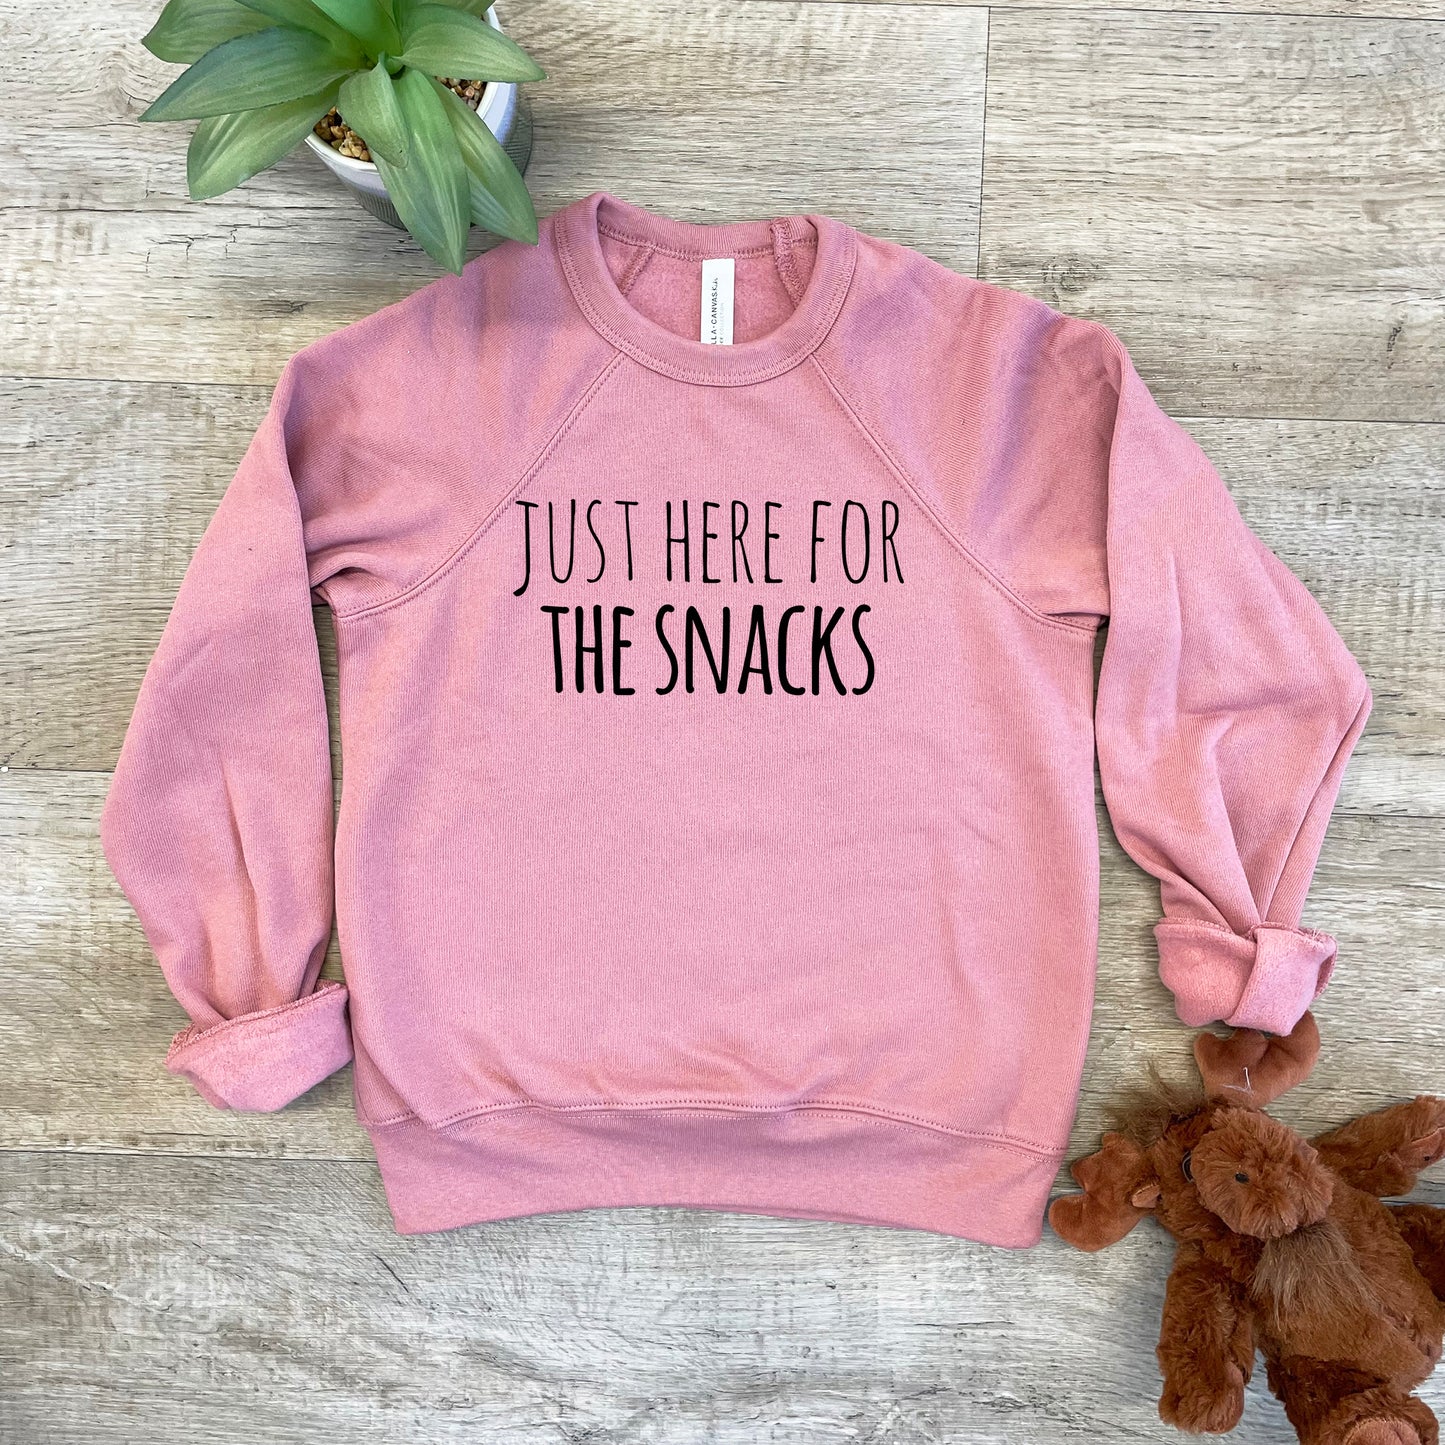 Just Here For The Snacks - Kid's Sweatshirt - Heather Gray or Mauve